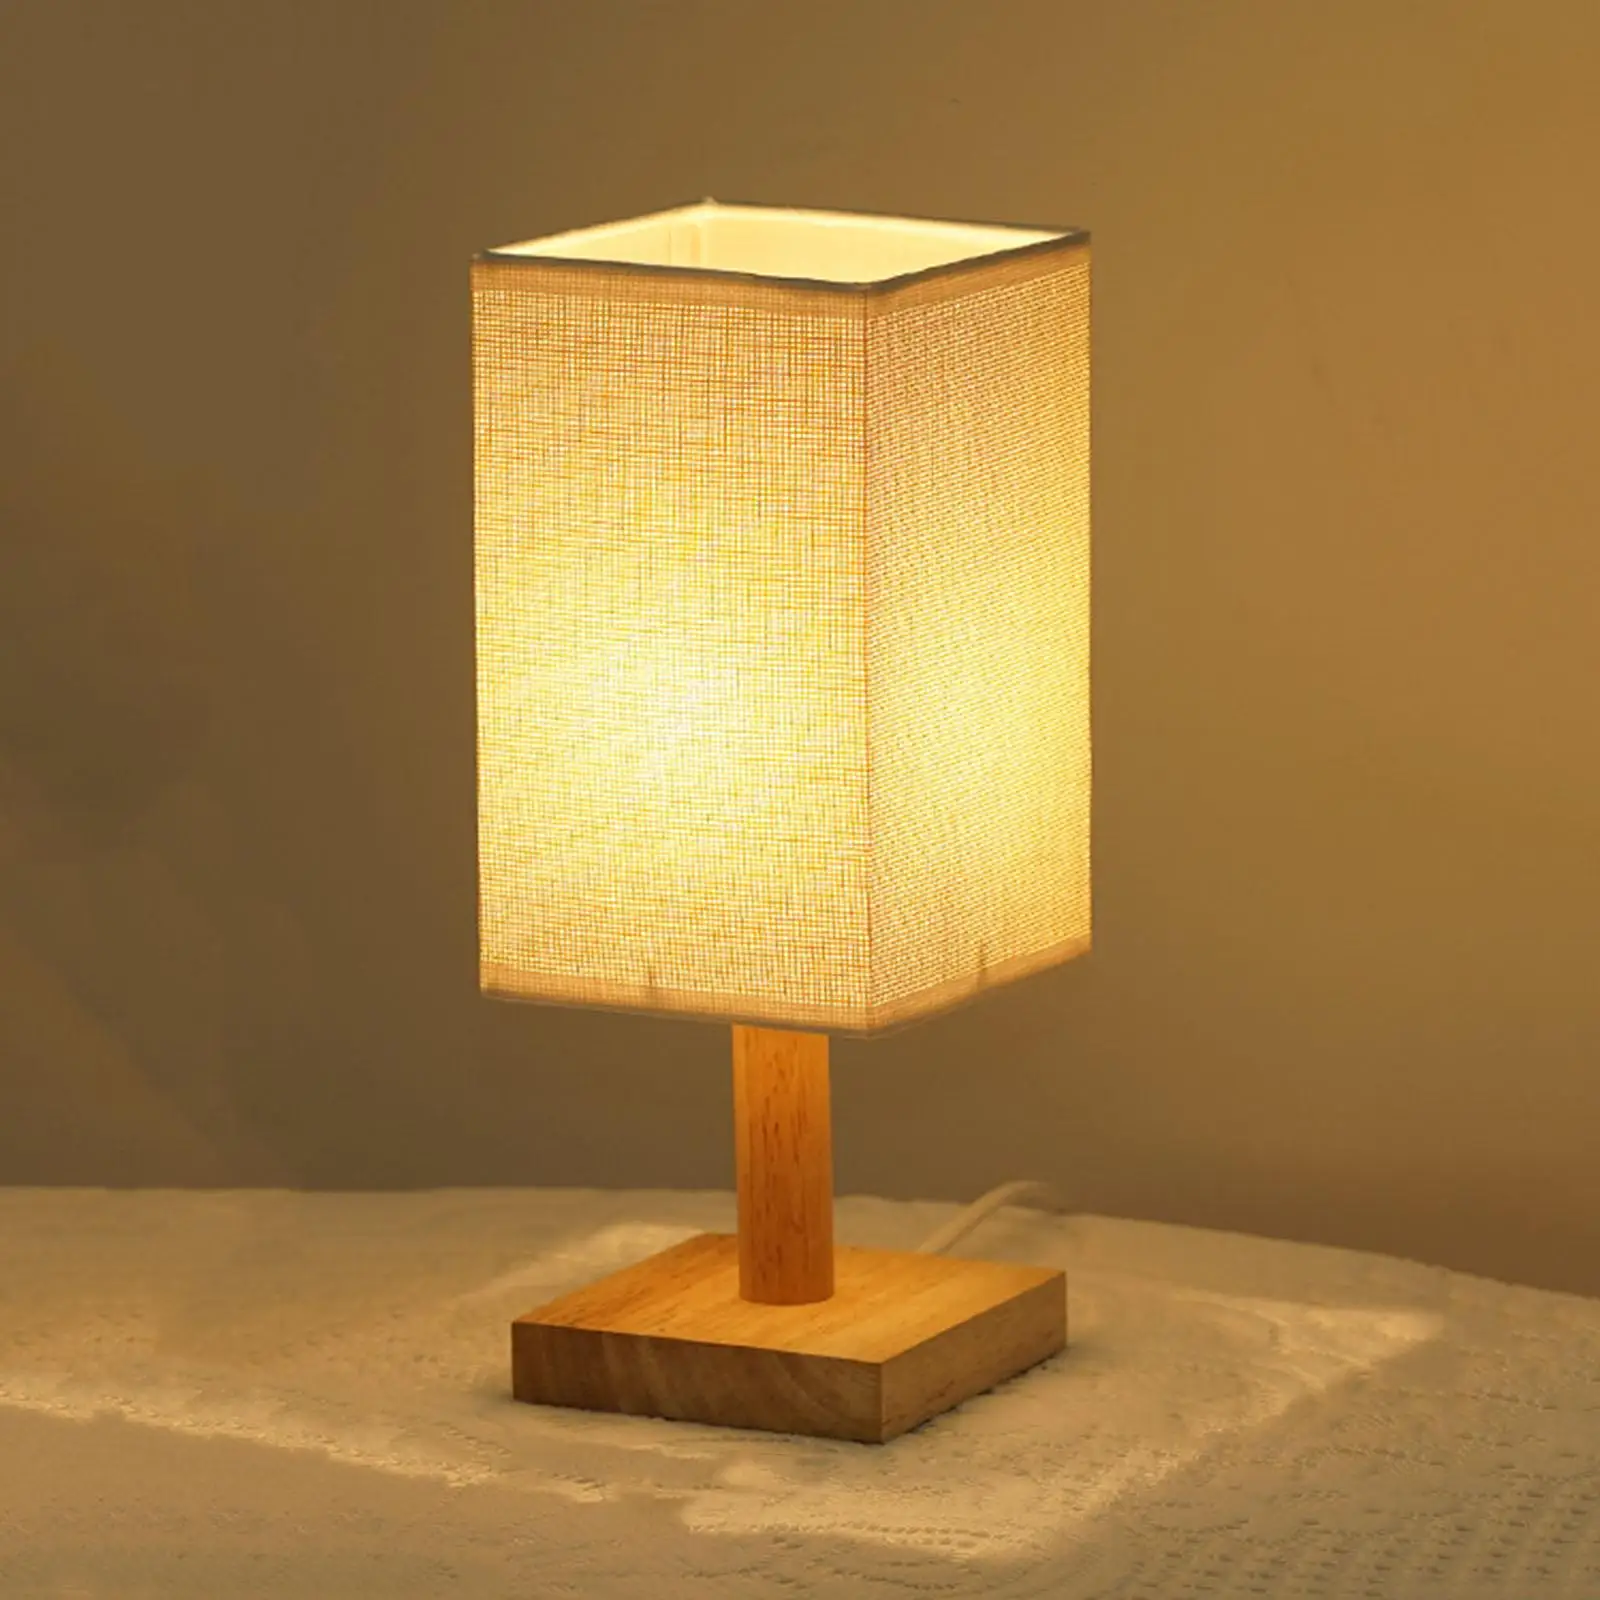 Bedside Table Lamp with Linen Fabric Shade Night Light Home Decor Warm White